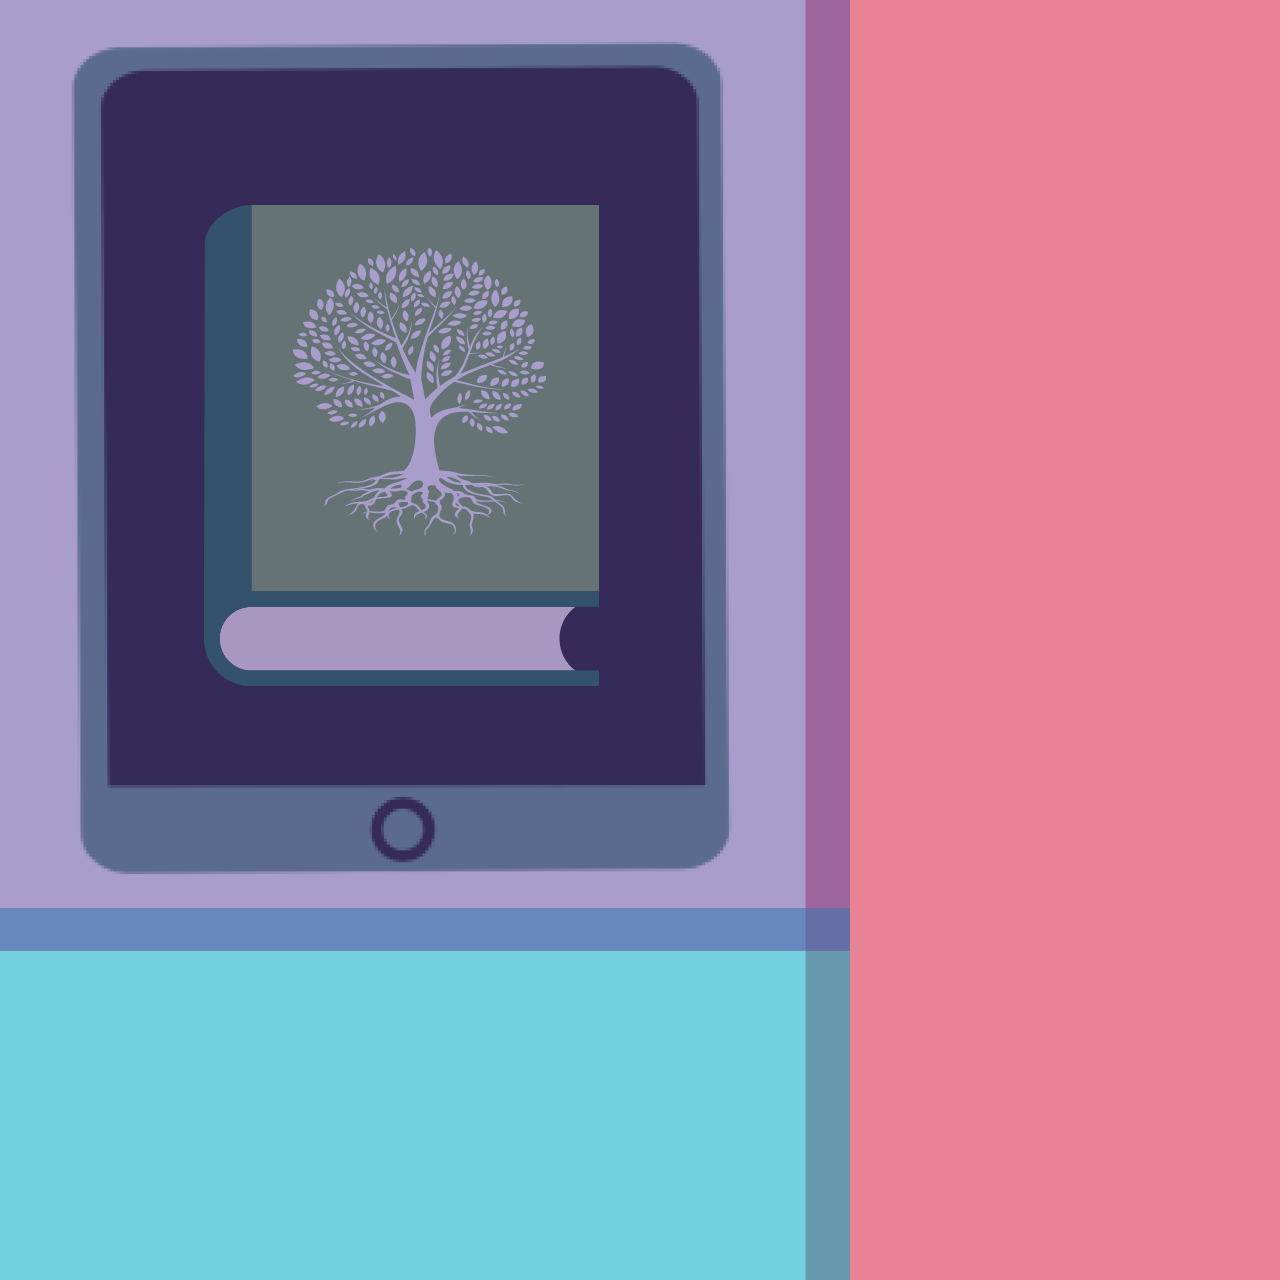 A family tree book on a tablet overlaid with the library colors.